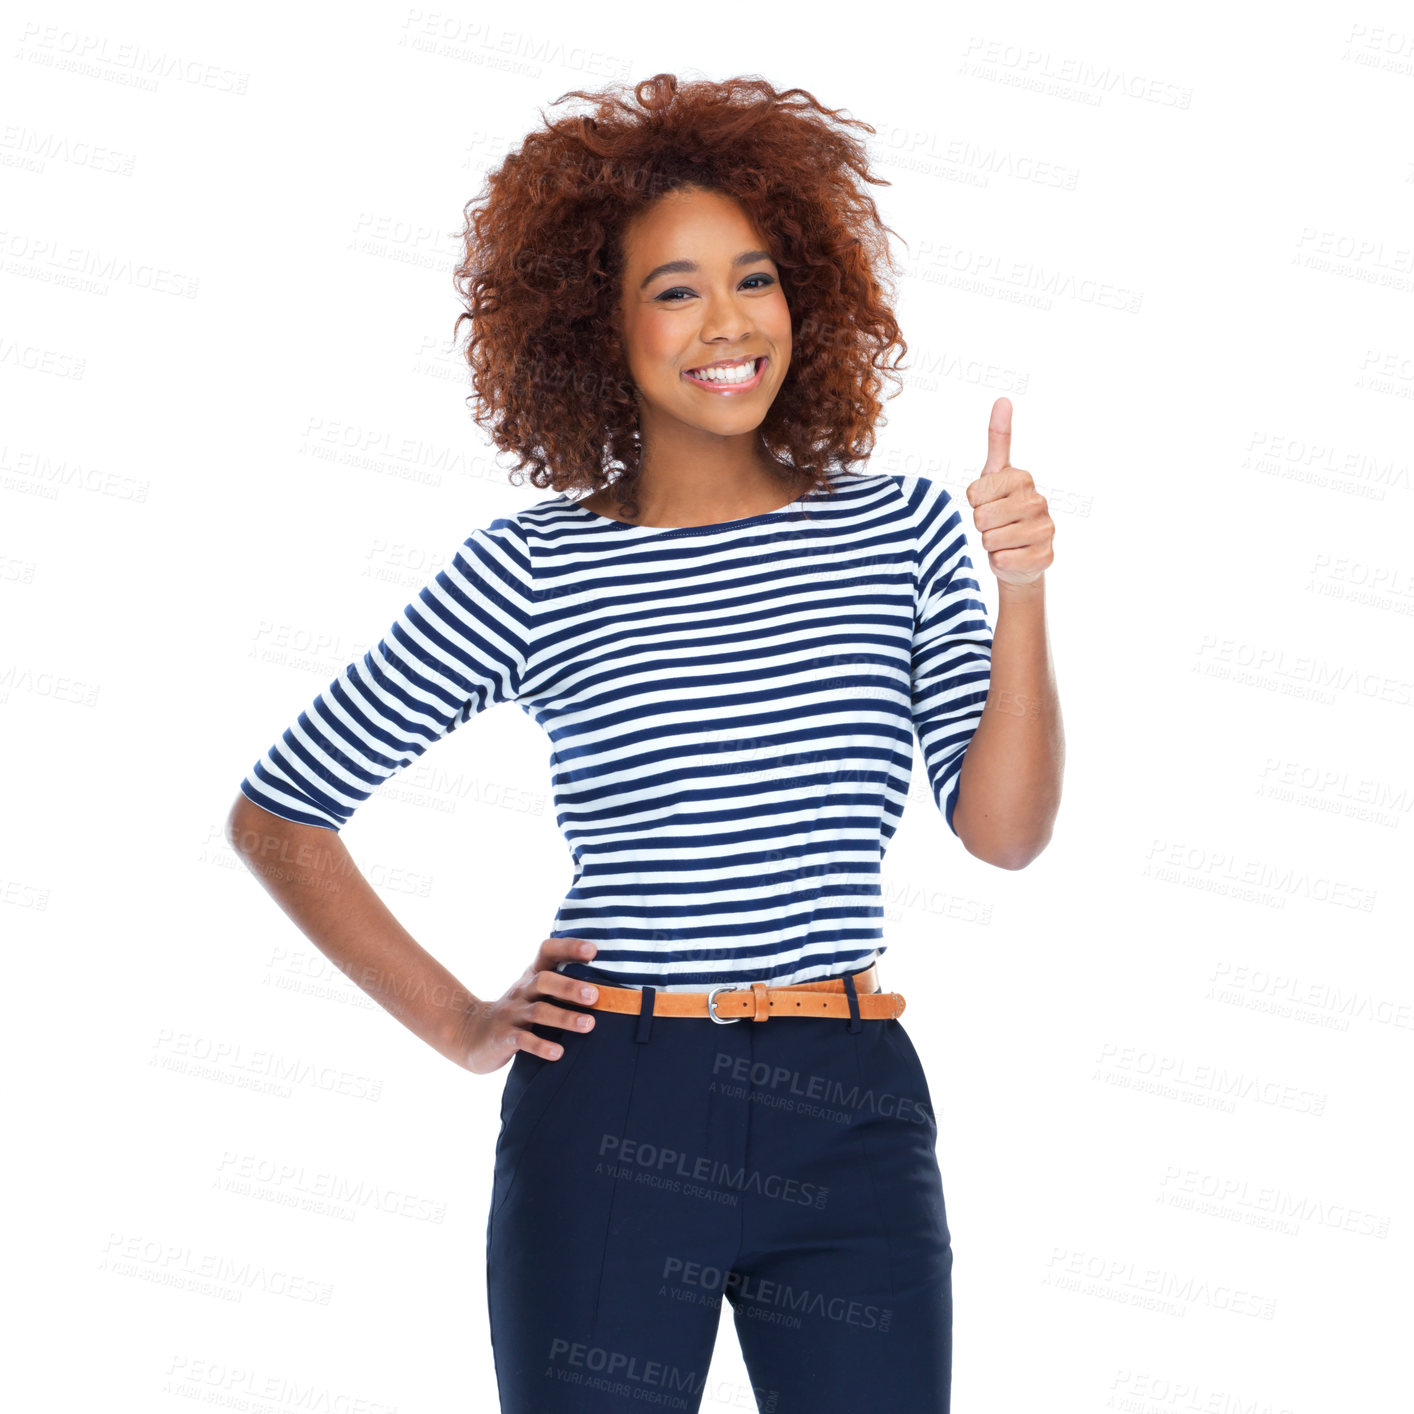 Buy stock photo Thumbs up, happy and portrait of a black woman in a studio with a casual, stylish and cool outfit. Fashion, smile and African female model with an approval gesture isolated by a white background.